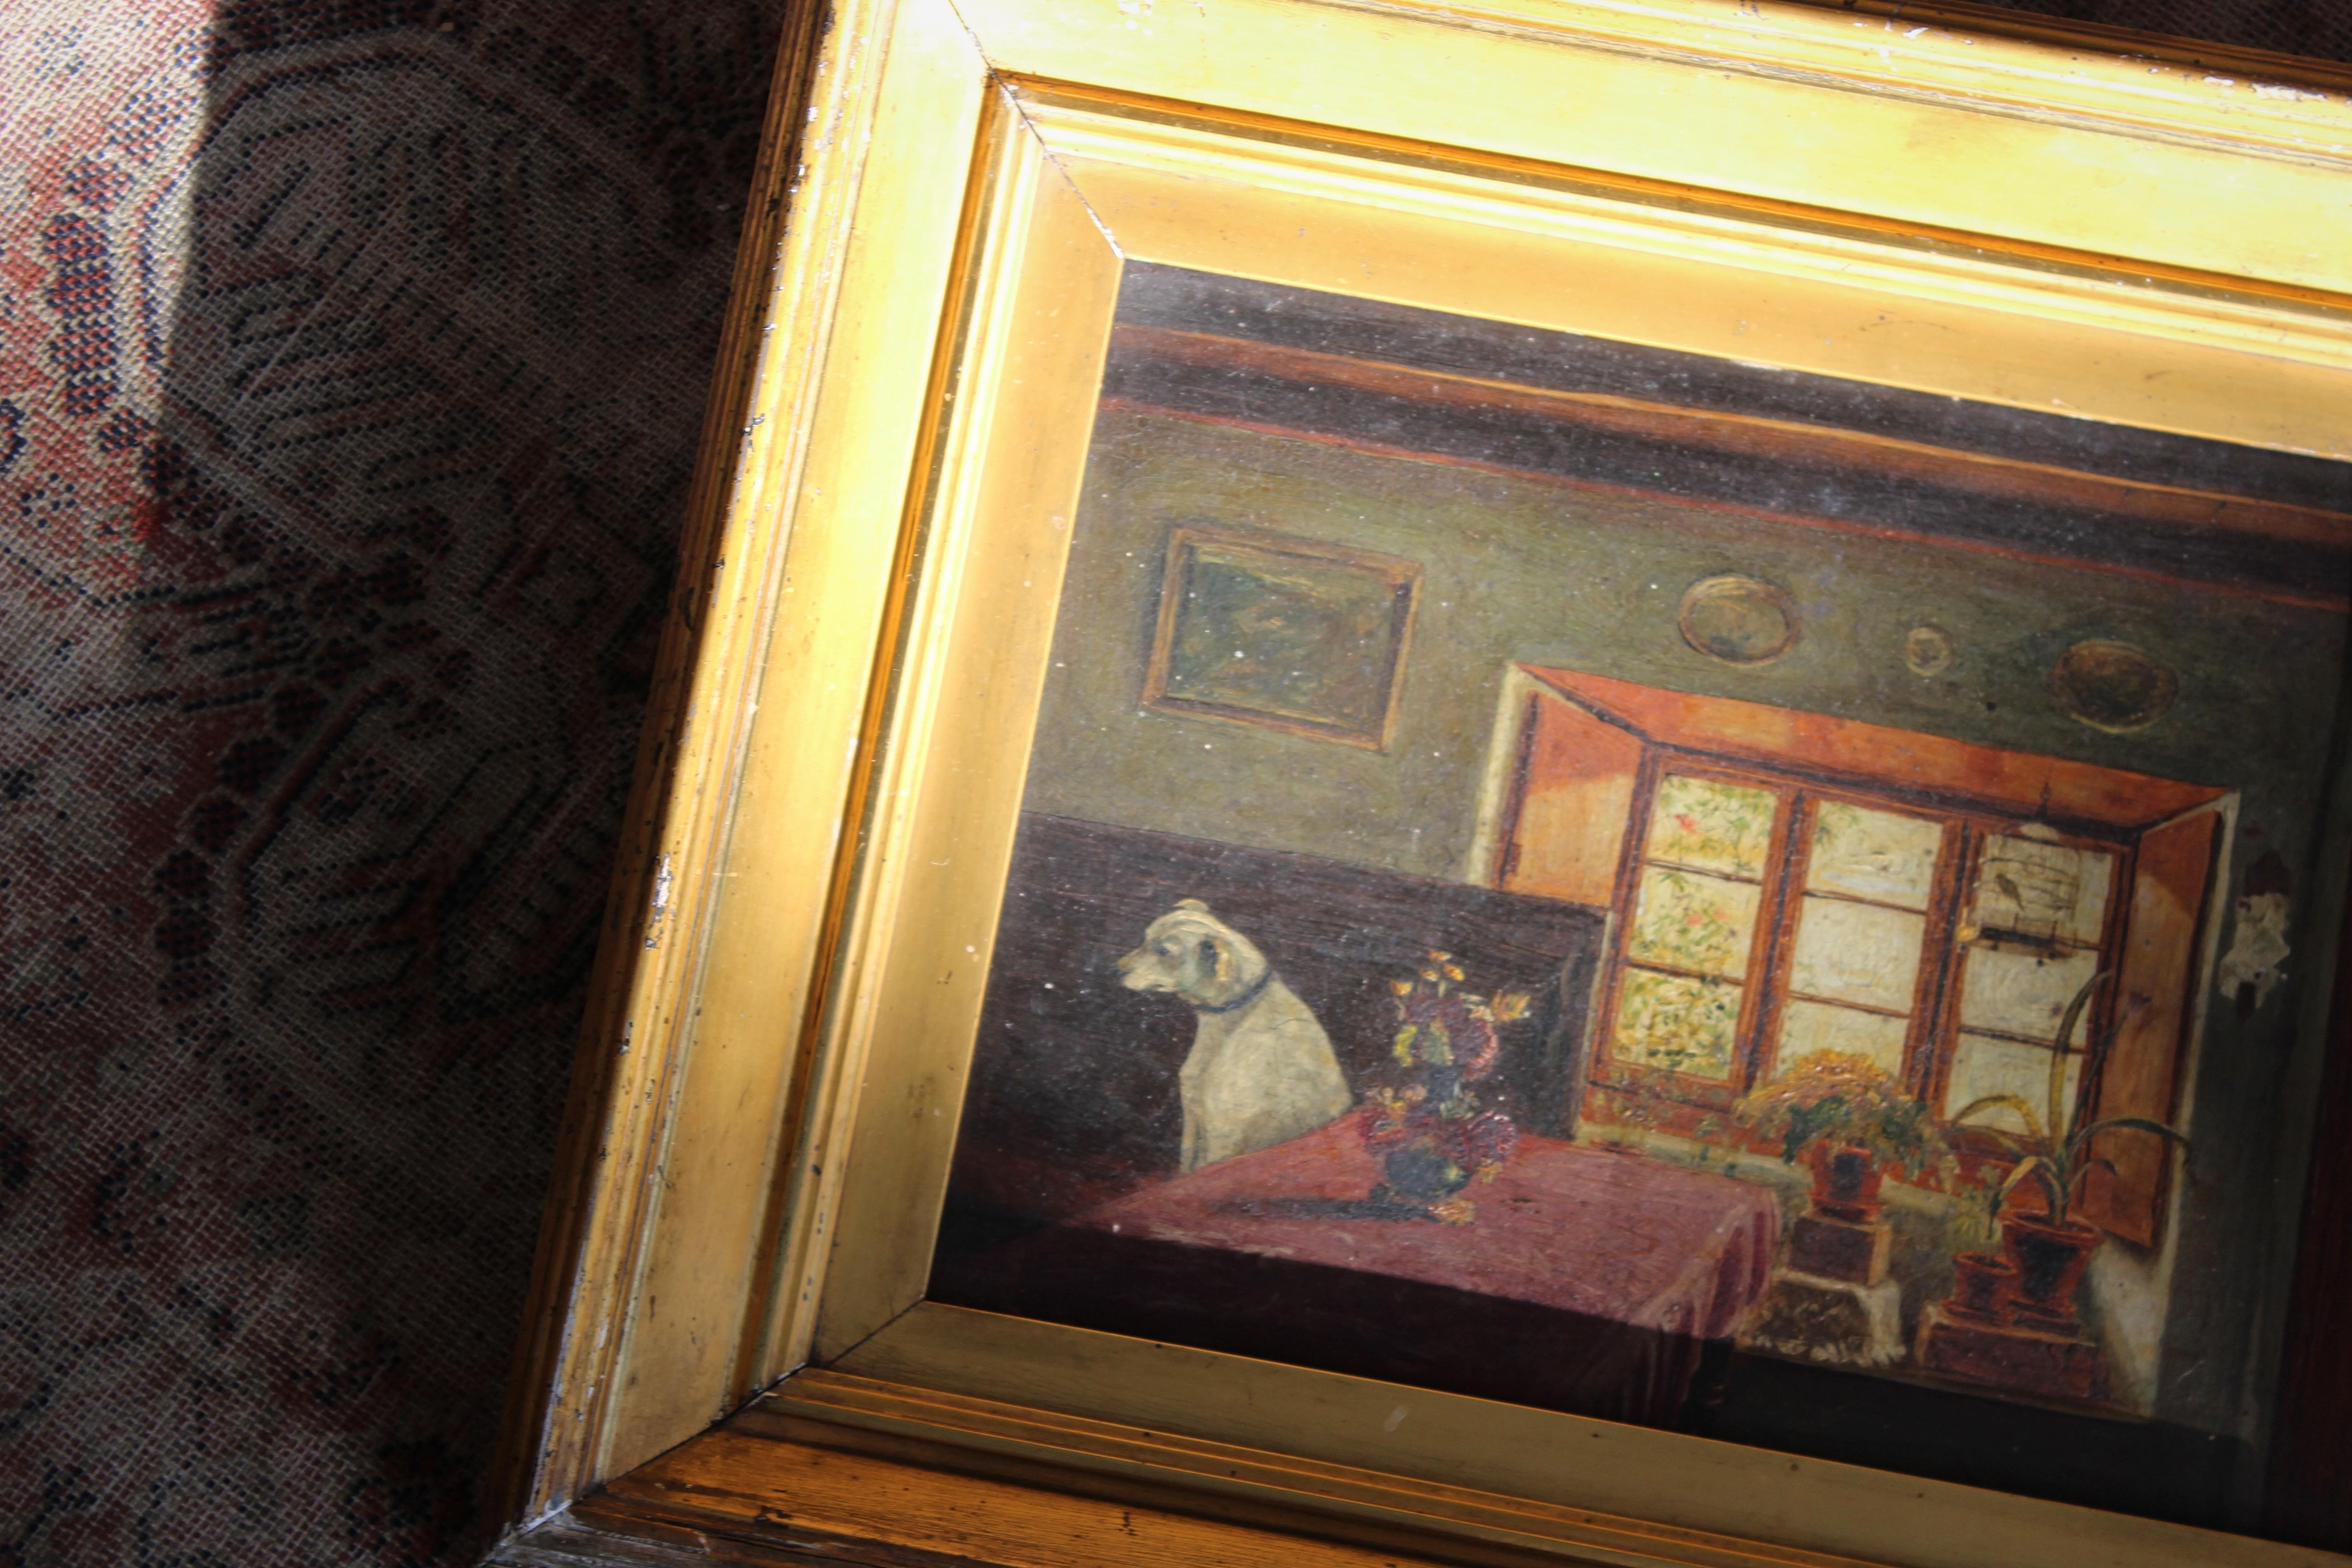 A charming oil on board painting of a pondering dog in a country house kitchen. Age related craquelure to the painted surface, the odd knock and abrasion to the gilt gesso frame. But overall in good honest original condition.

On the reverse of the